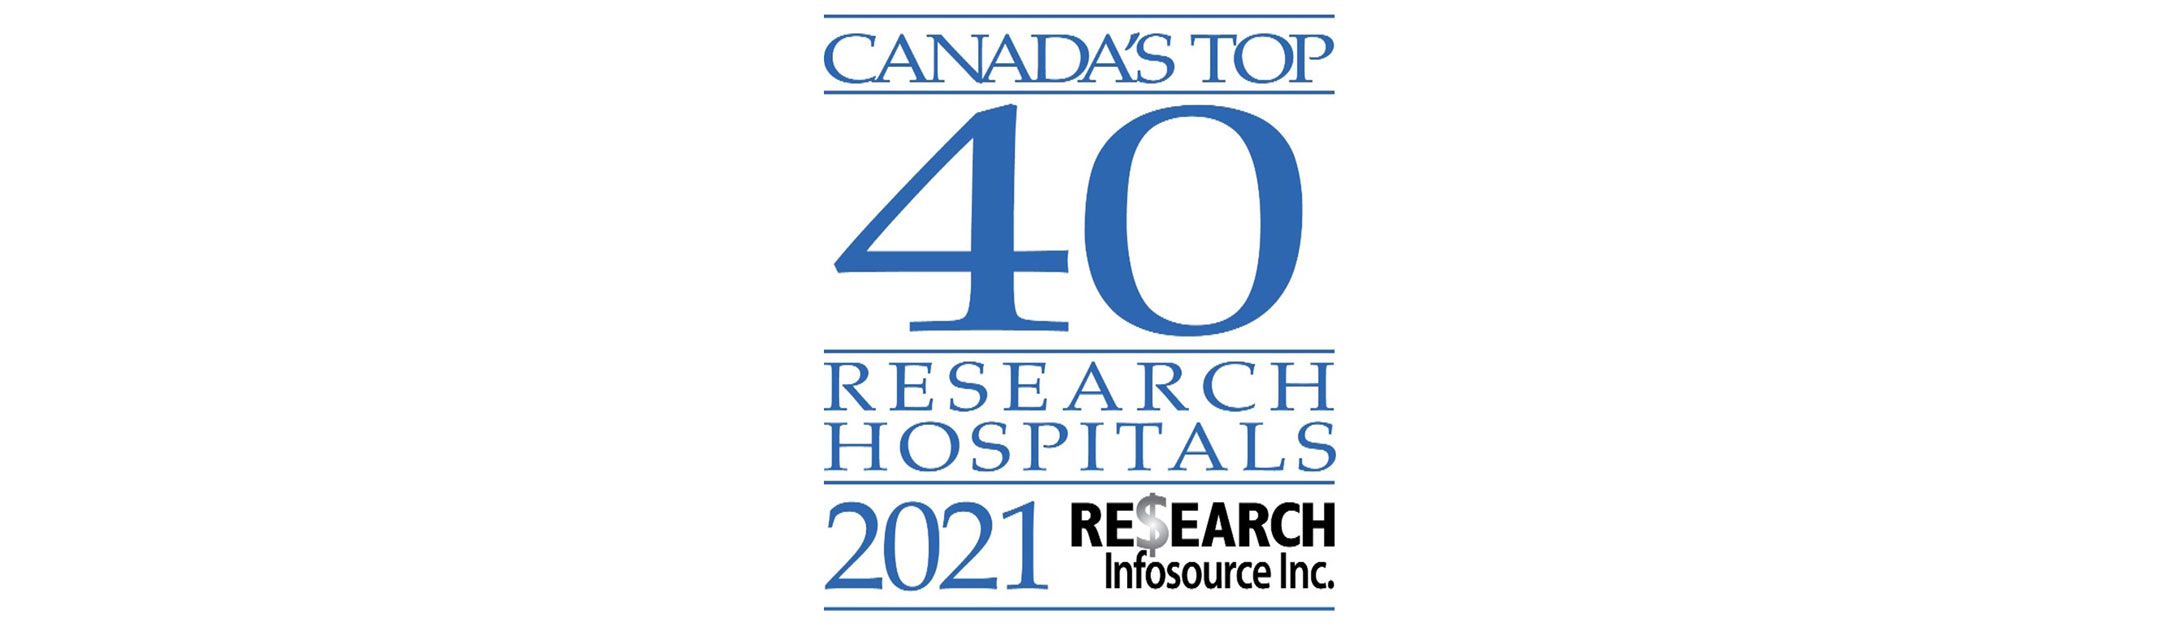 Top 40 Research Hospitals 2021 Research Infosource